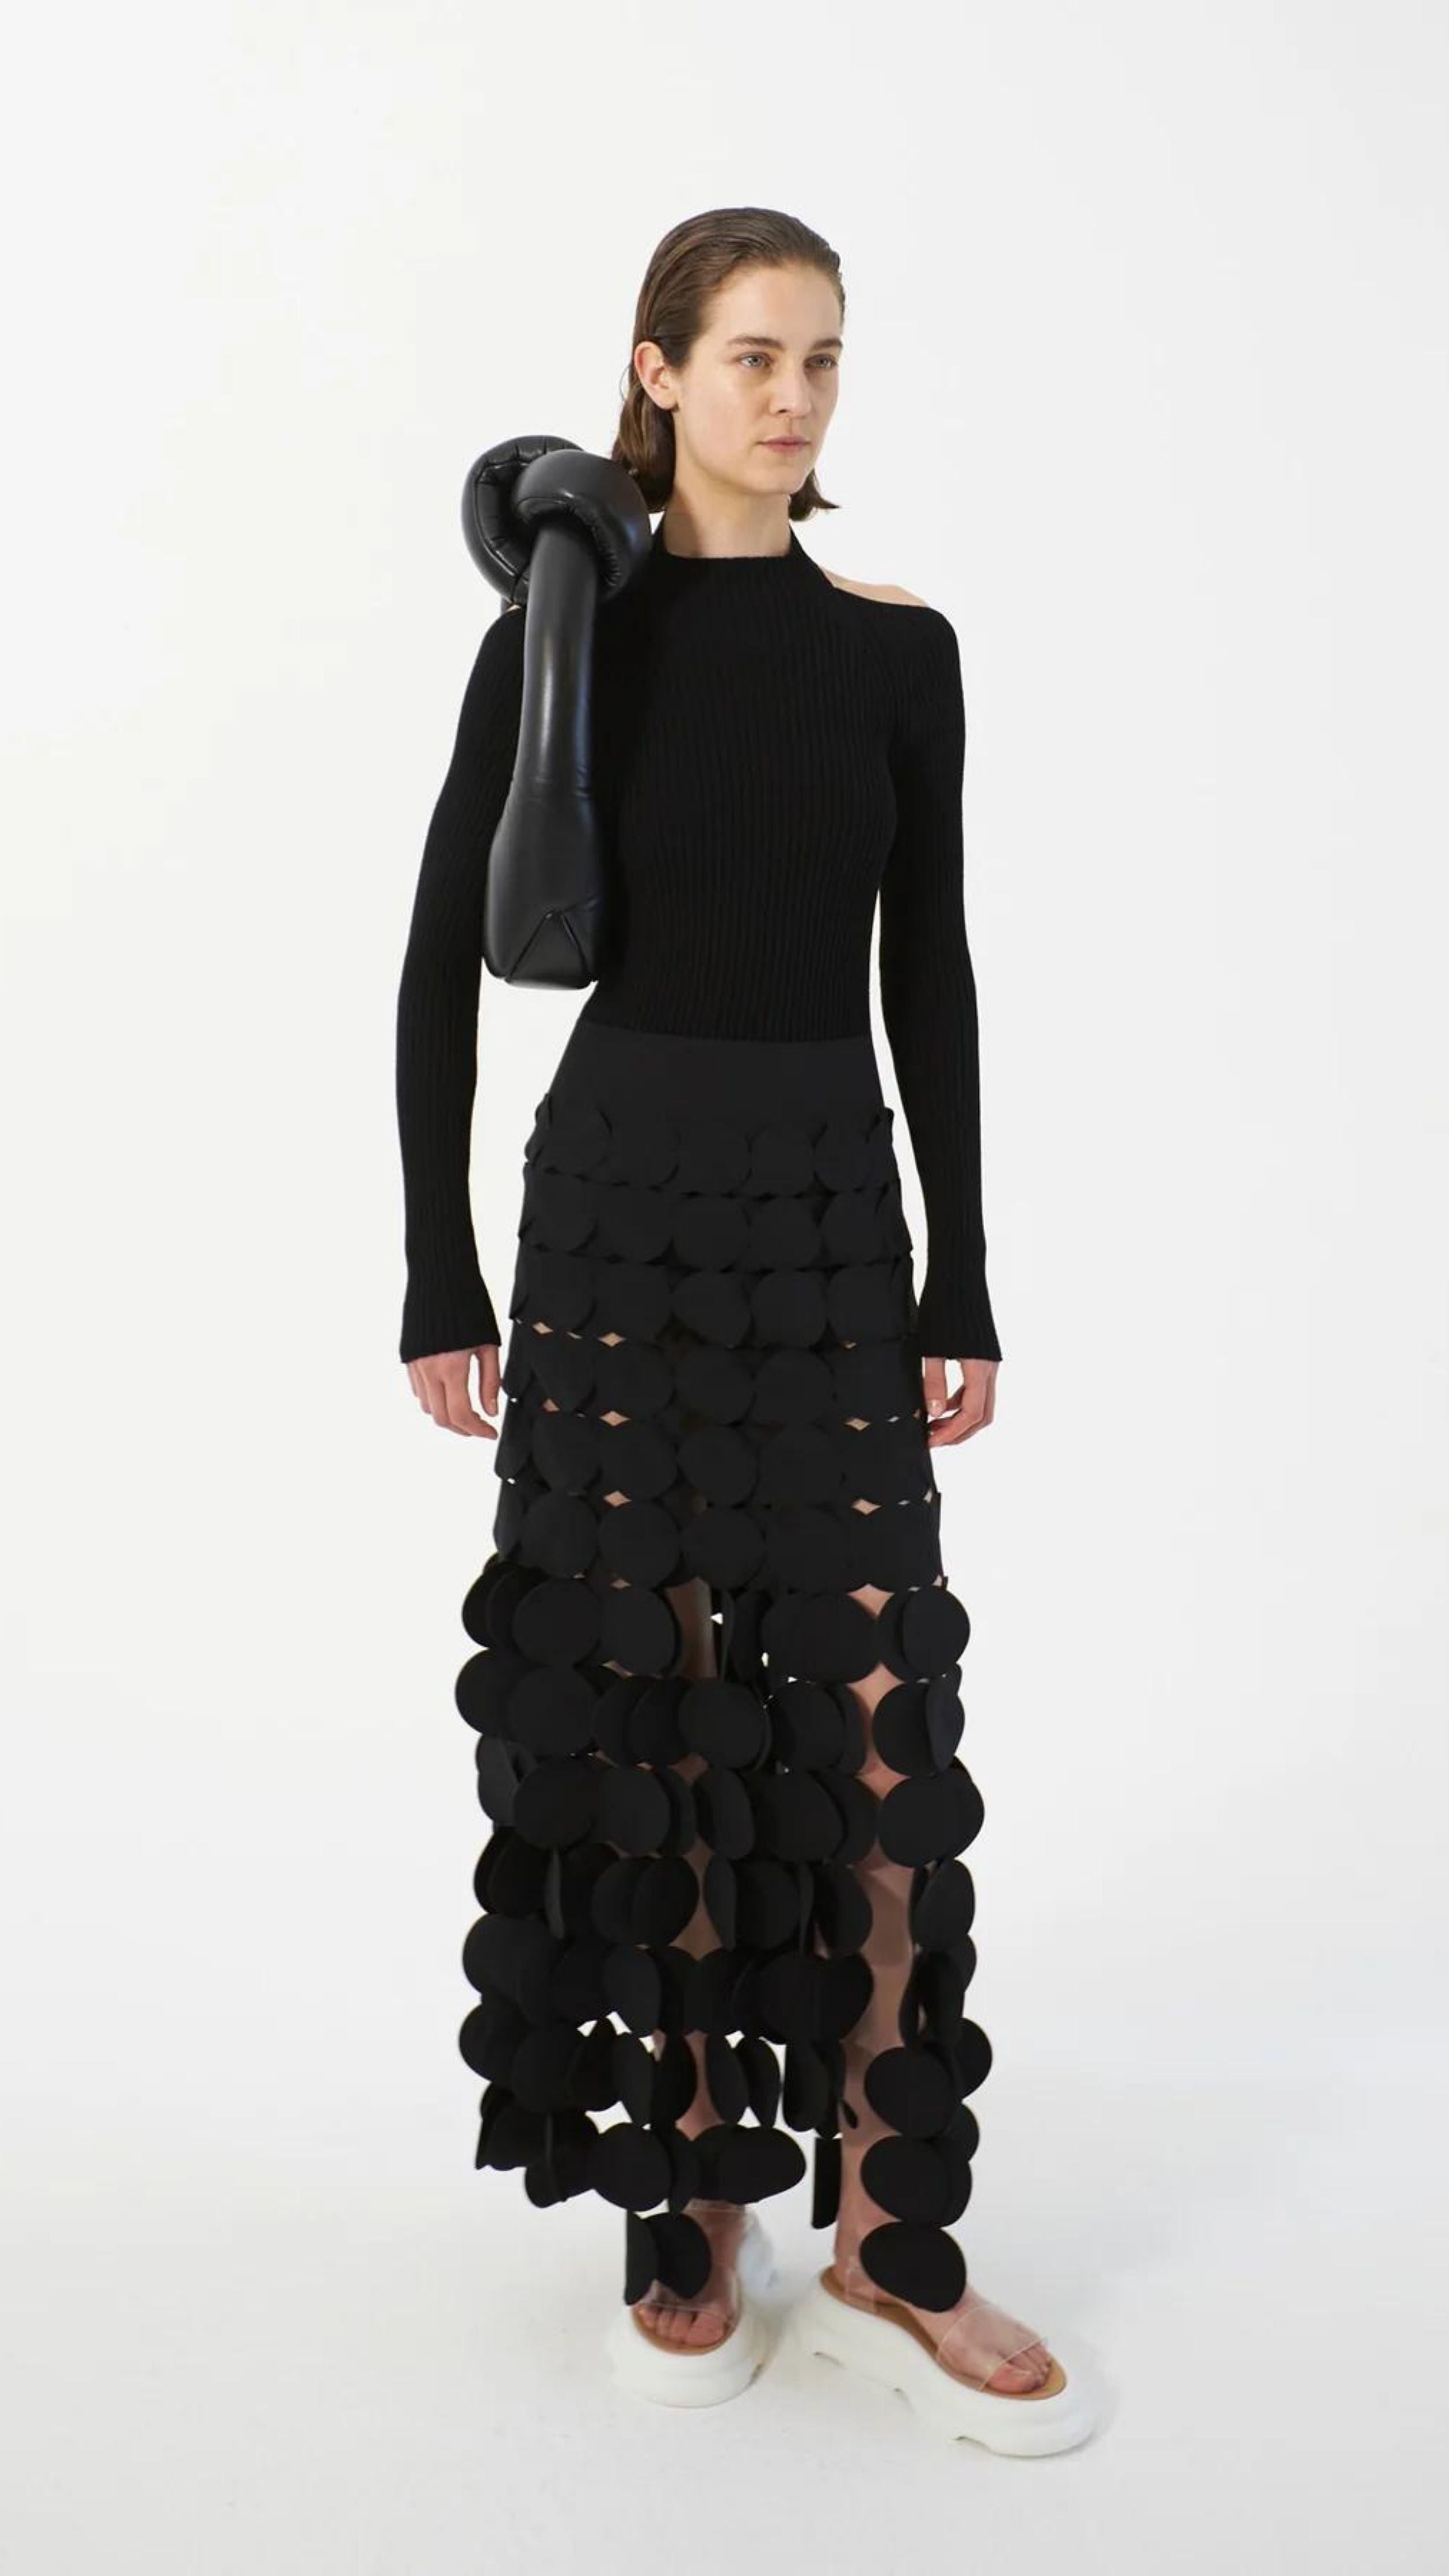 AWAKE Mode Laser Cut Multi Circle Double Layer Skirt. Icon AWAKE Mode circle skirt with a double layer to cover the right areas. With an elastic waist and the circle layers midi to maxi length. Shown on a model facing front.